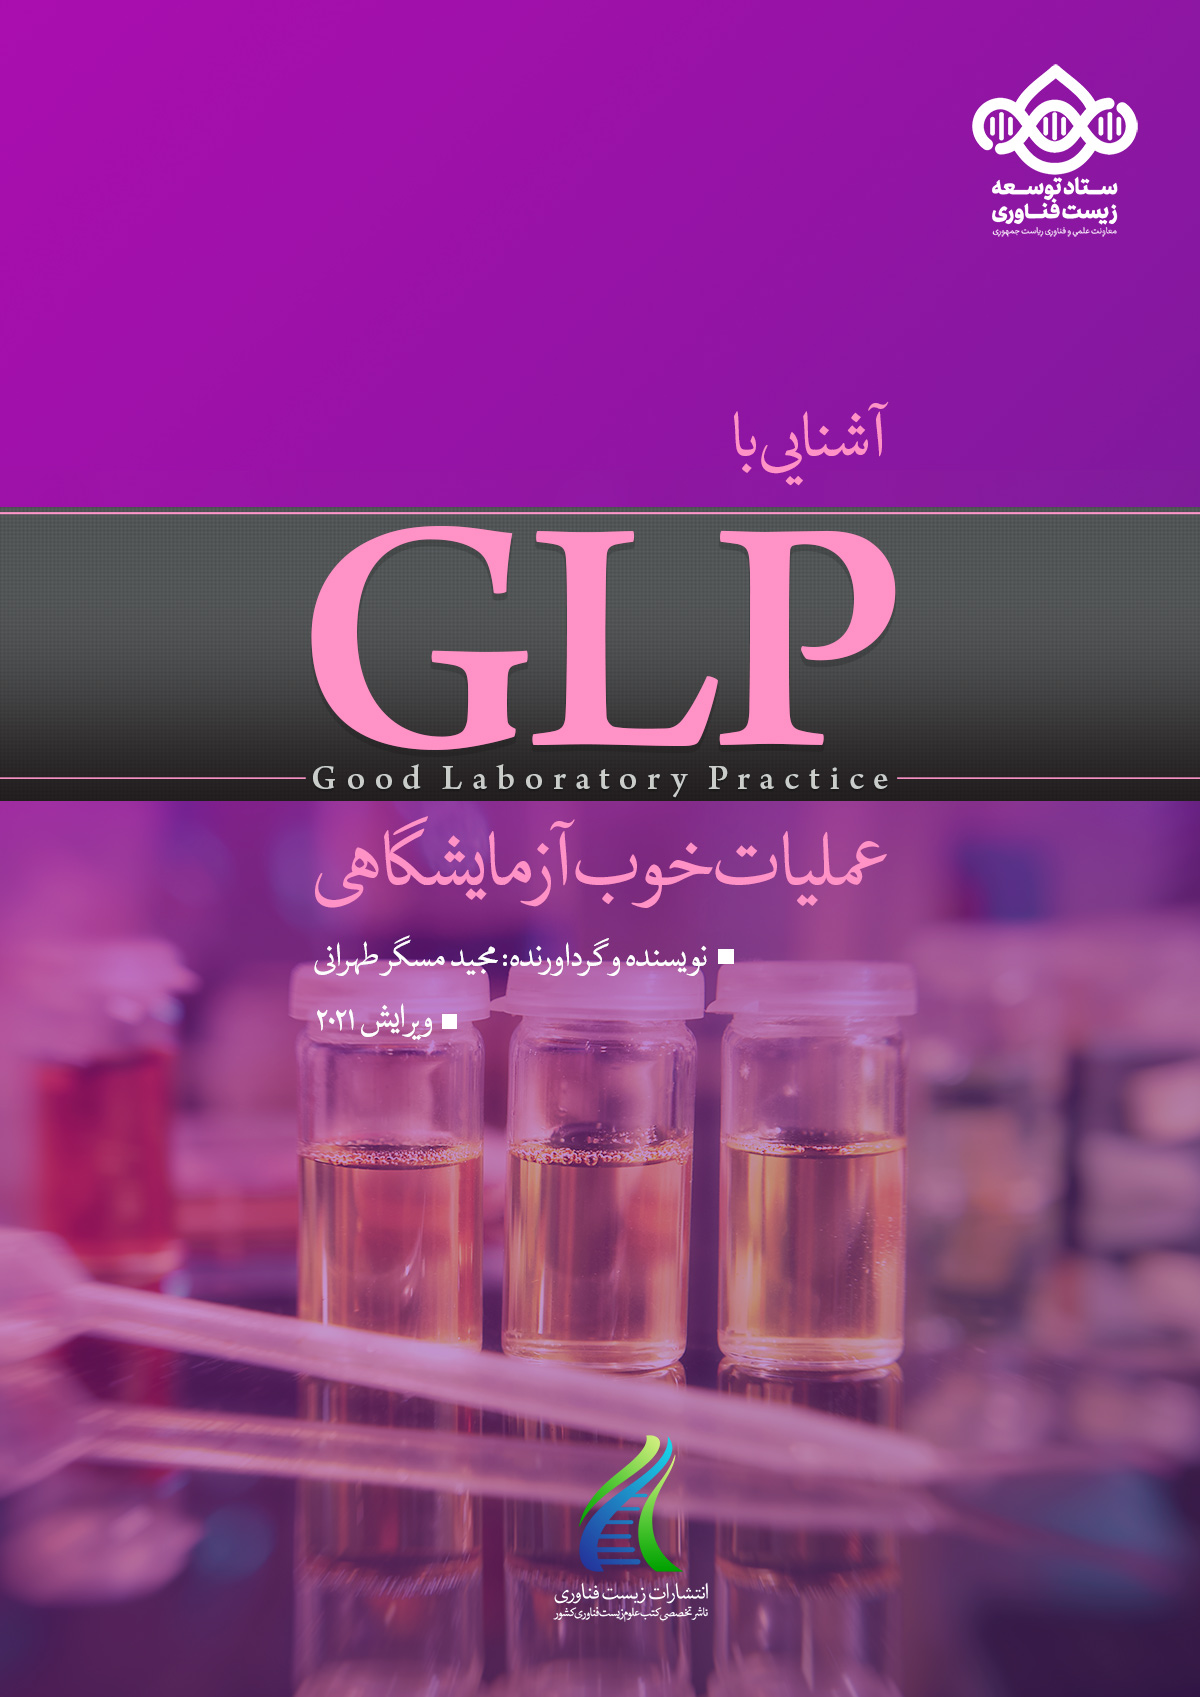 Familiarity with good laboratory practice (GLP)